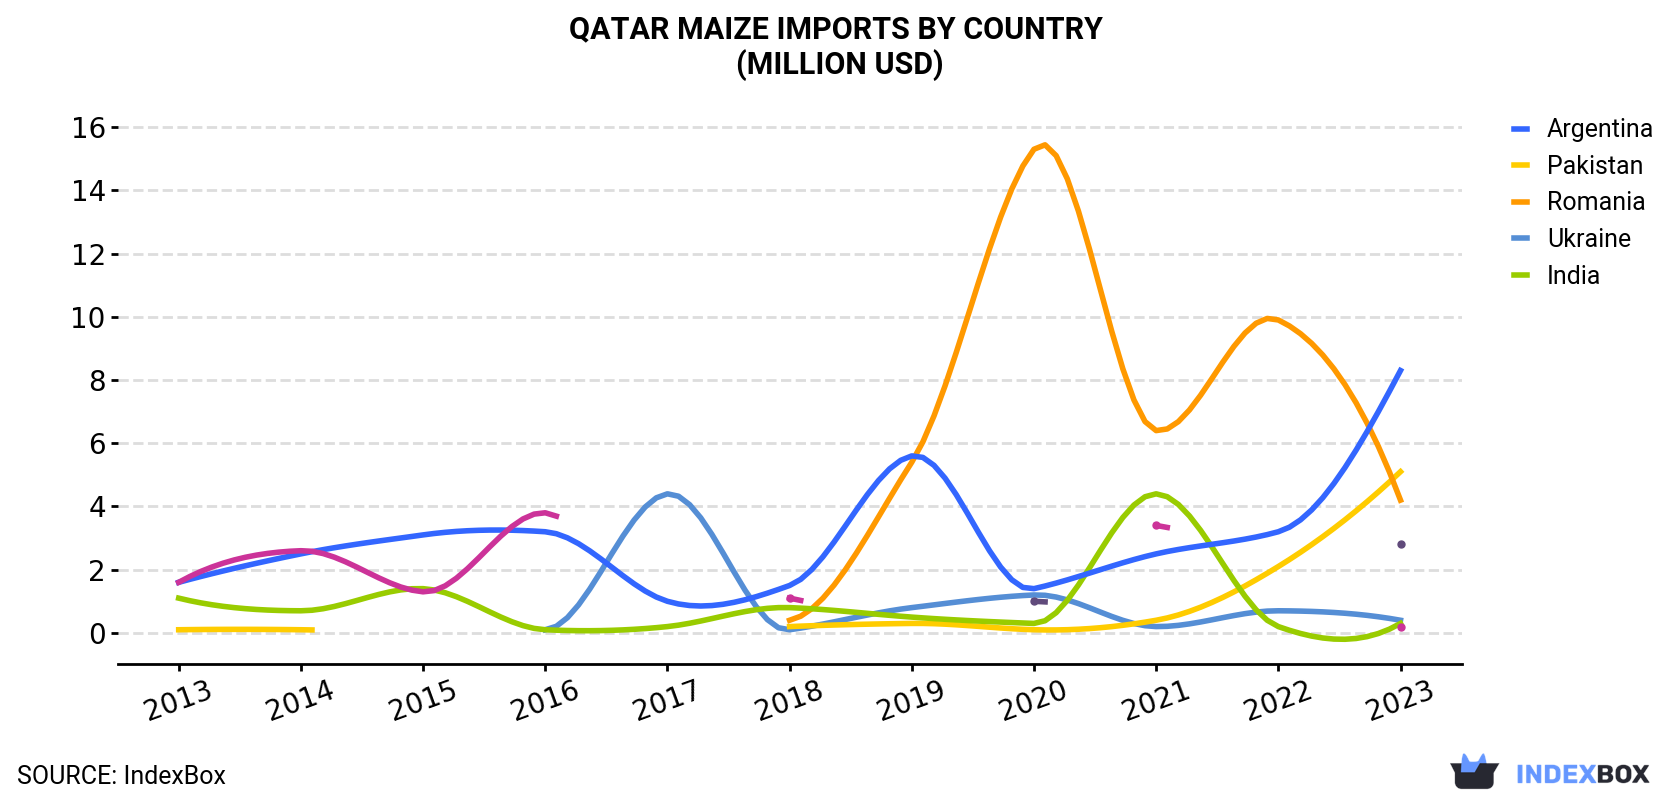 Qatar Maize Imports By Country (Million USD)